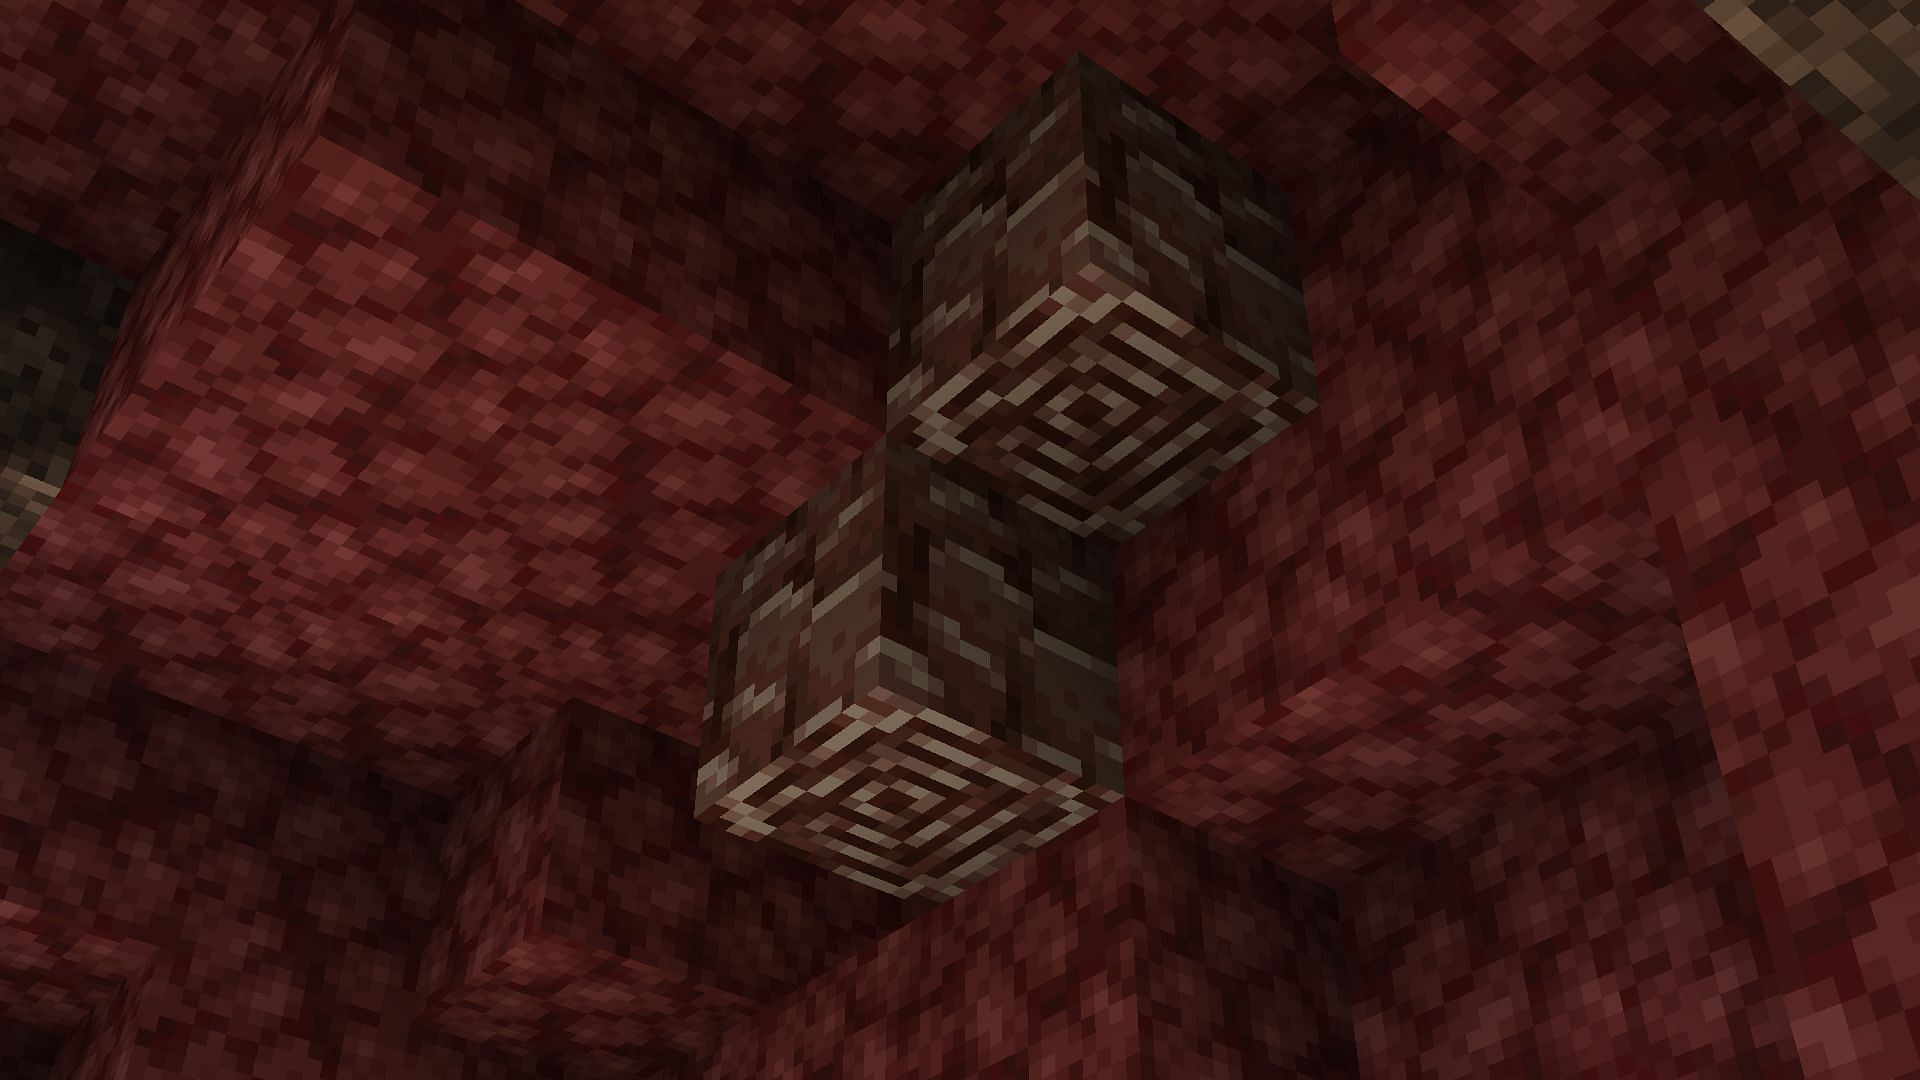 Finding Ancient Debris blocks in the Nether is one of the hardest tasks (Image via Minecraft 1.19)